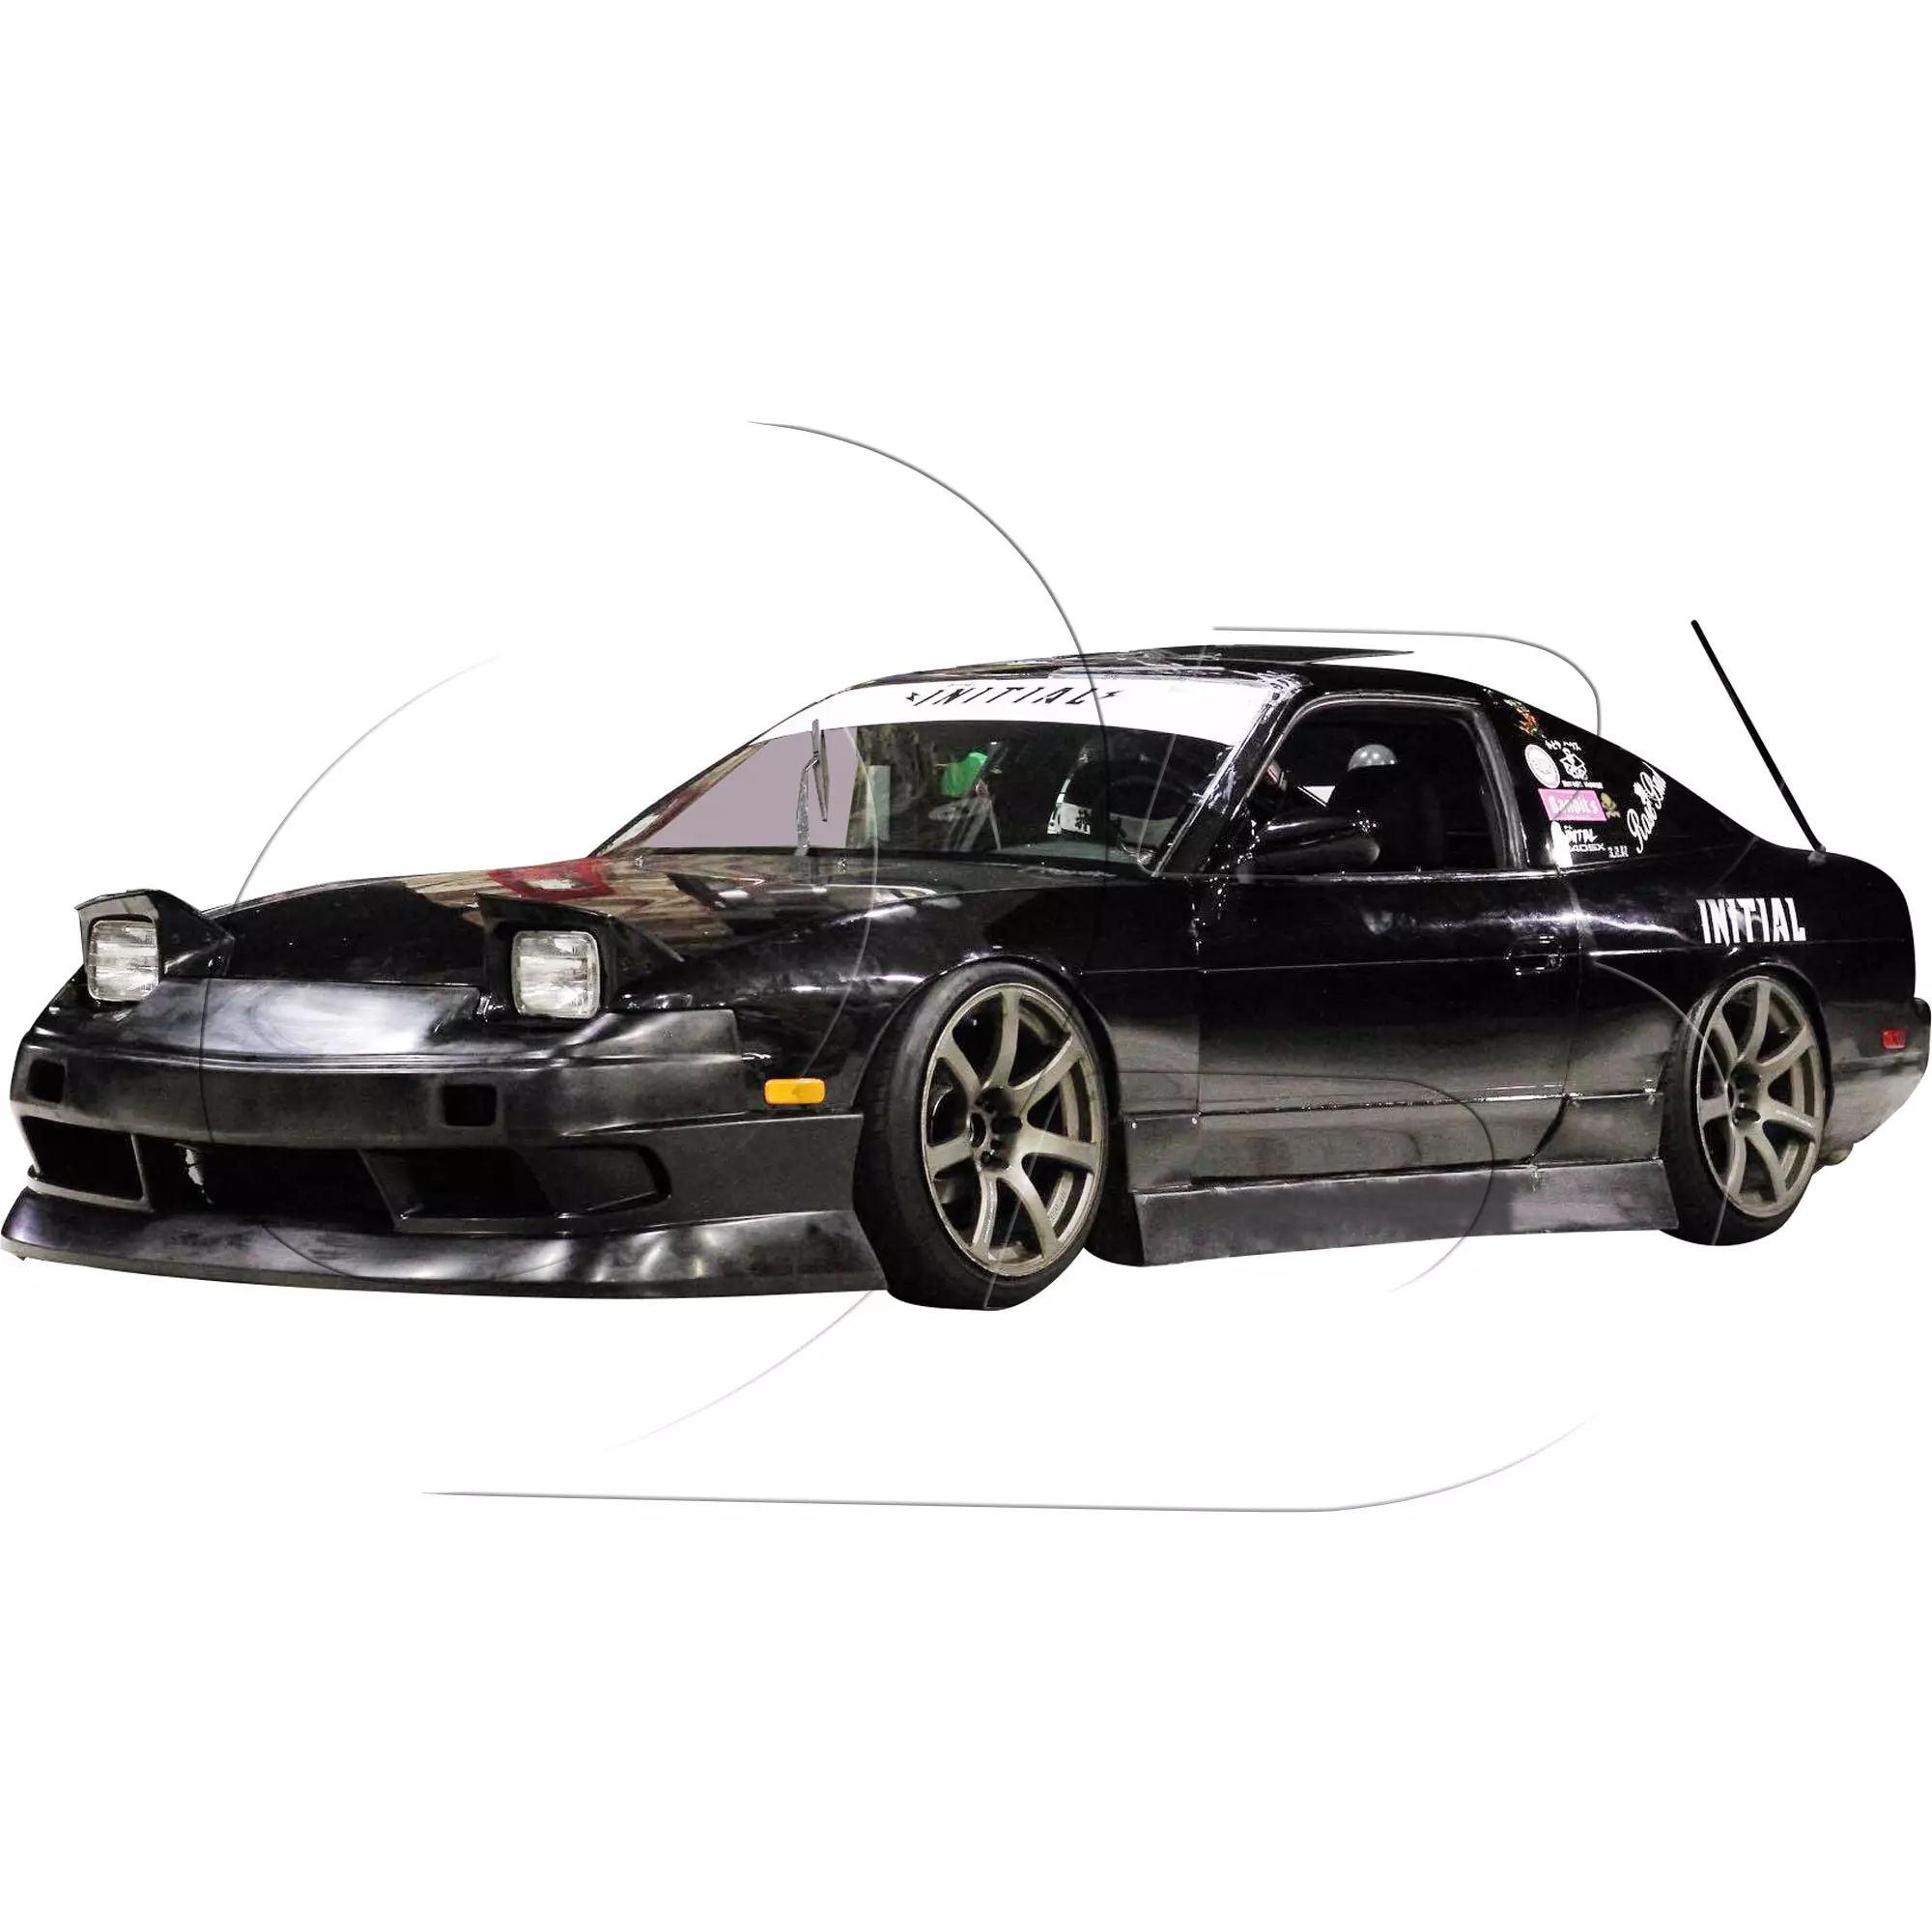 KBD Urethane Bsport2 Style 4pc Full Body Kit > Nissan 240SX 1989-1994 > 2dr Coupe - Image 15